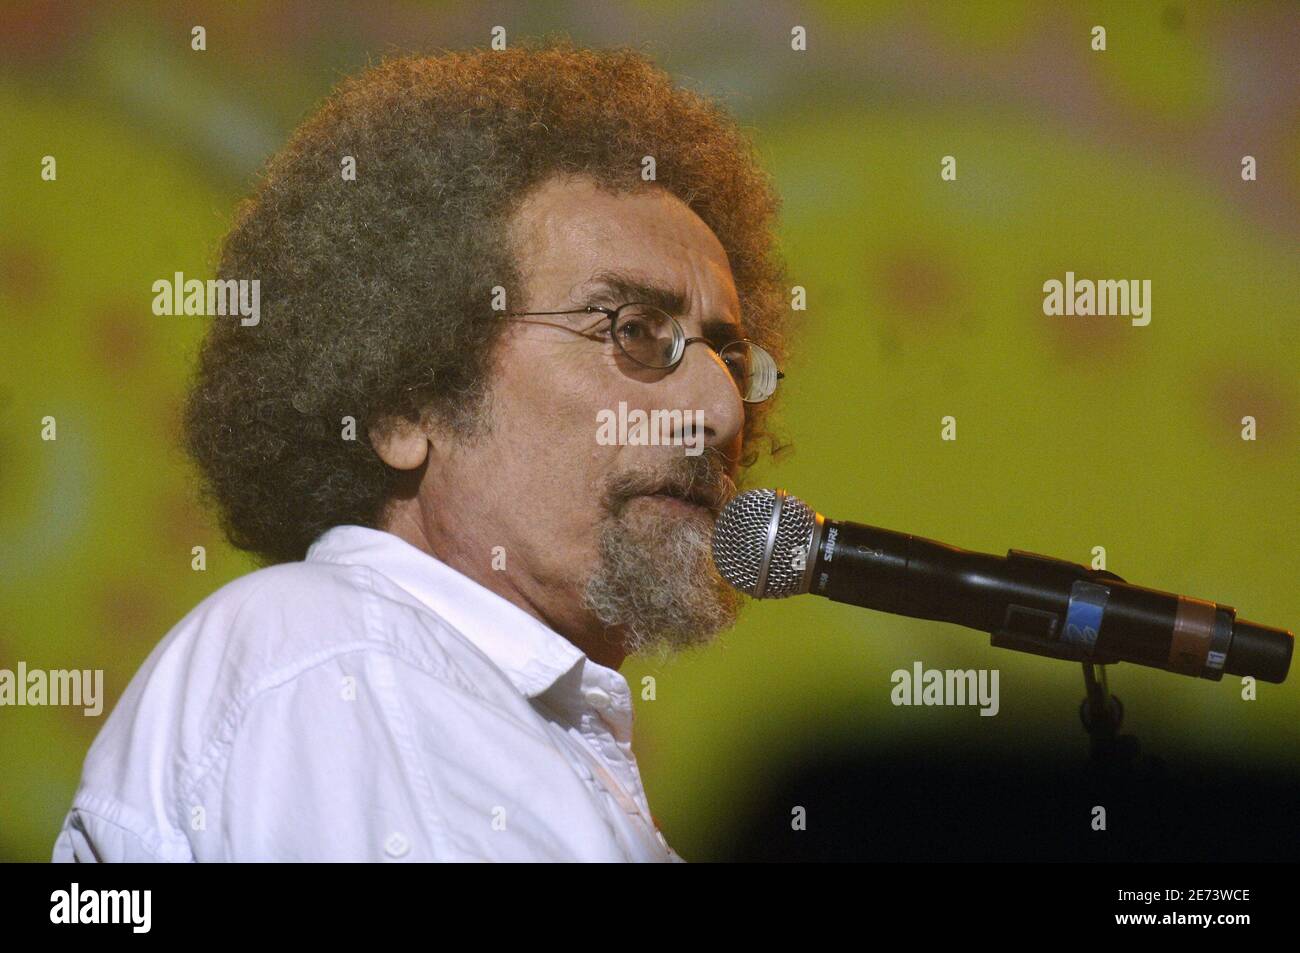 Jean Schultheis performs at Le Zenith during the RFM Party 80, in Paris,  France, on March 15, 2007. Photo by Giancarlo Gorassini/ABACAPRESS.COM  Stock Photo - Alamy